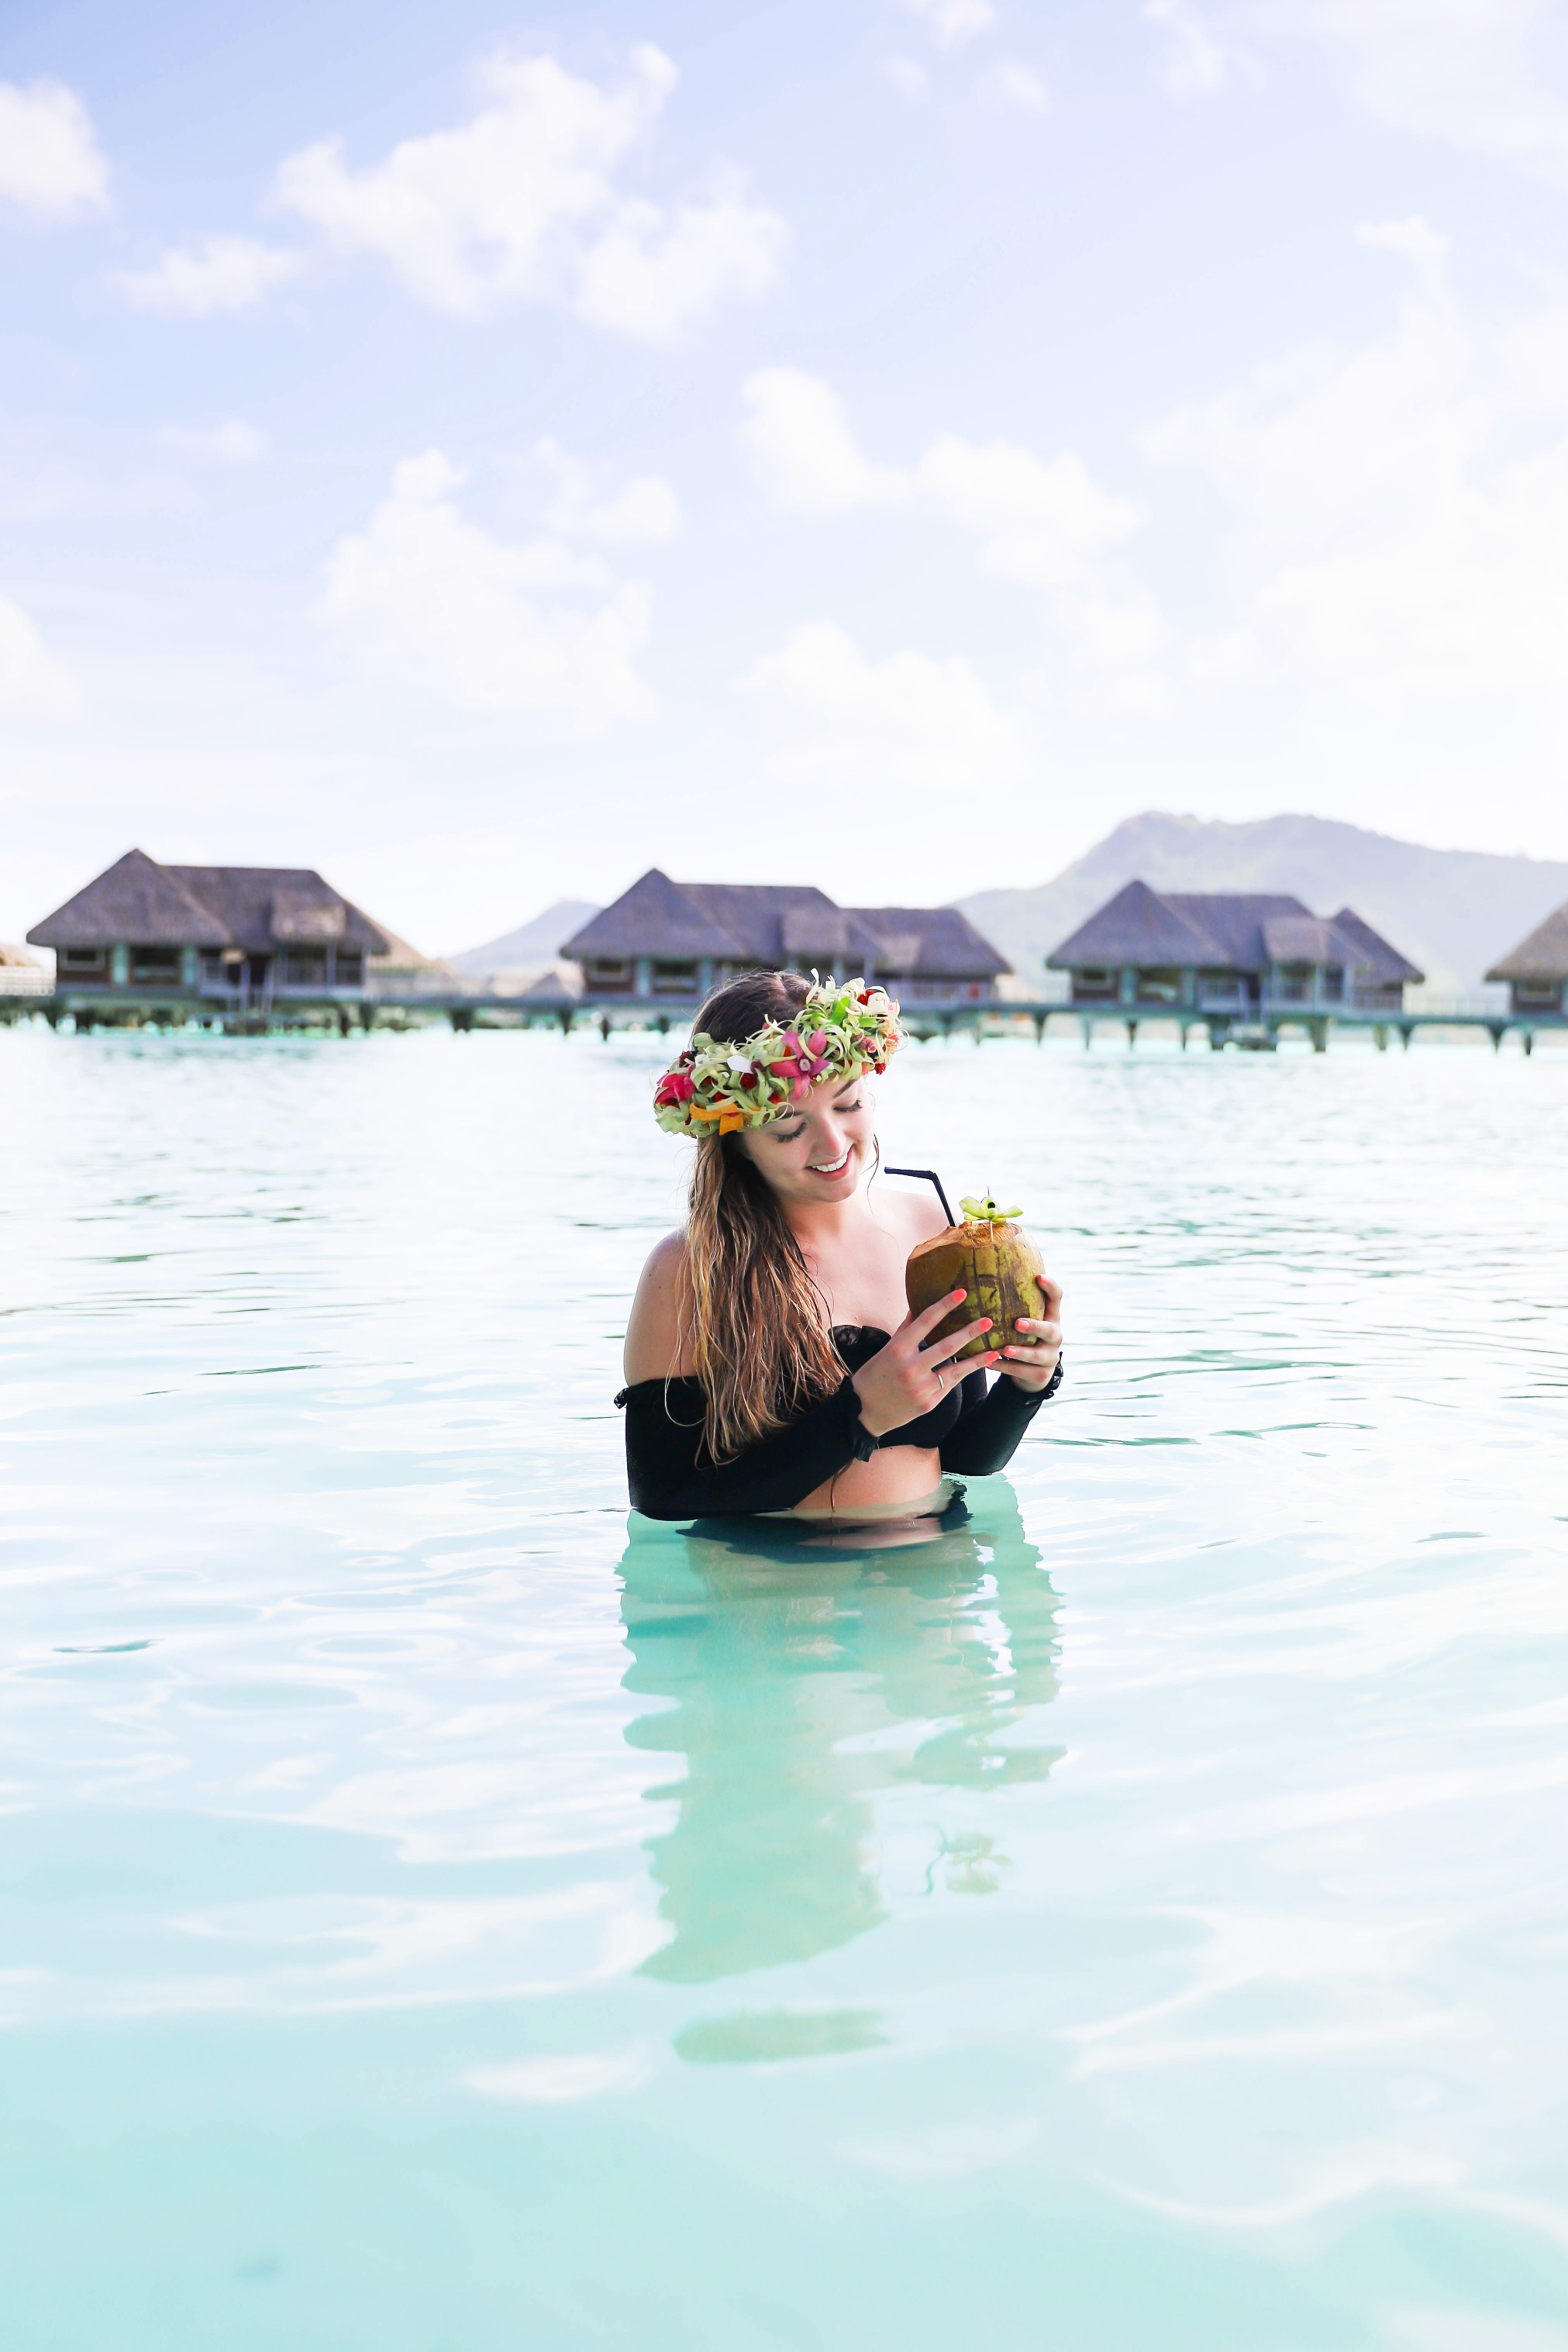 Coconut drink in bora bora, French Polynesia at the Intercontinental Hotel Thelasso! Cute beach photo and vacation photo inspiration! This black two piece high waisted long sleeve swimsuit bikini is my favorite! Details on travel blog Daily Dose of Charm by fashion blogger Lauren lindmark! 